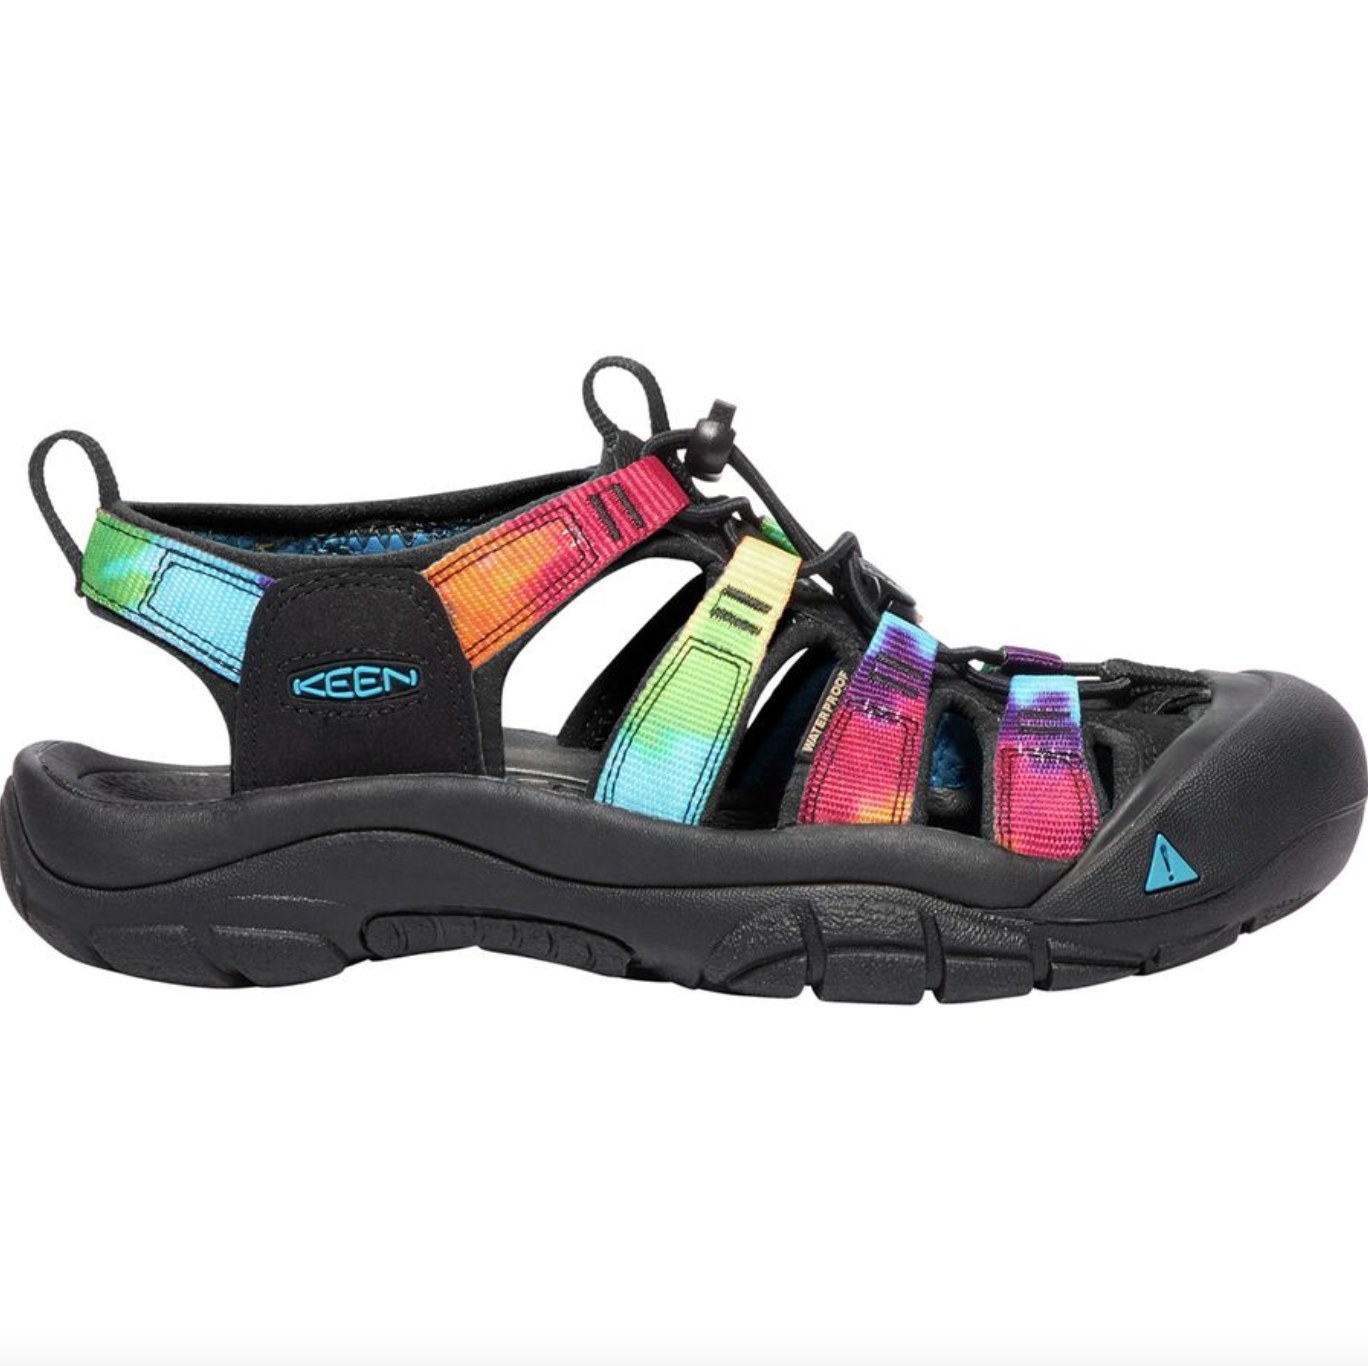 The Keen tie dye sandal with a black sole